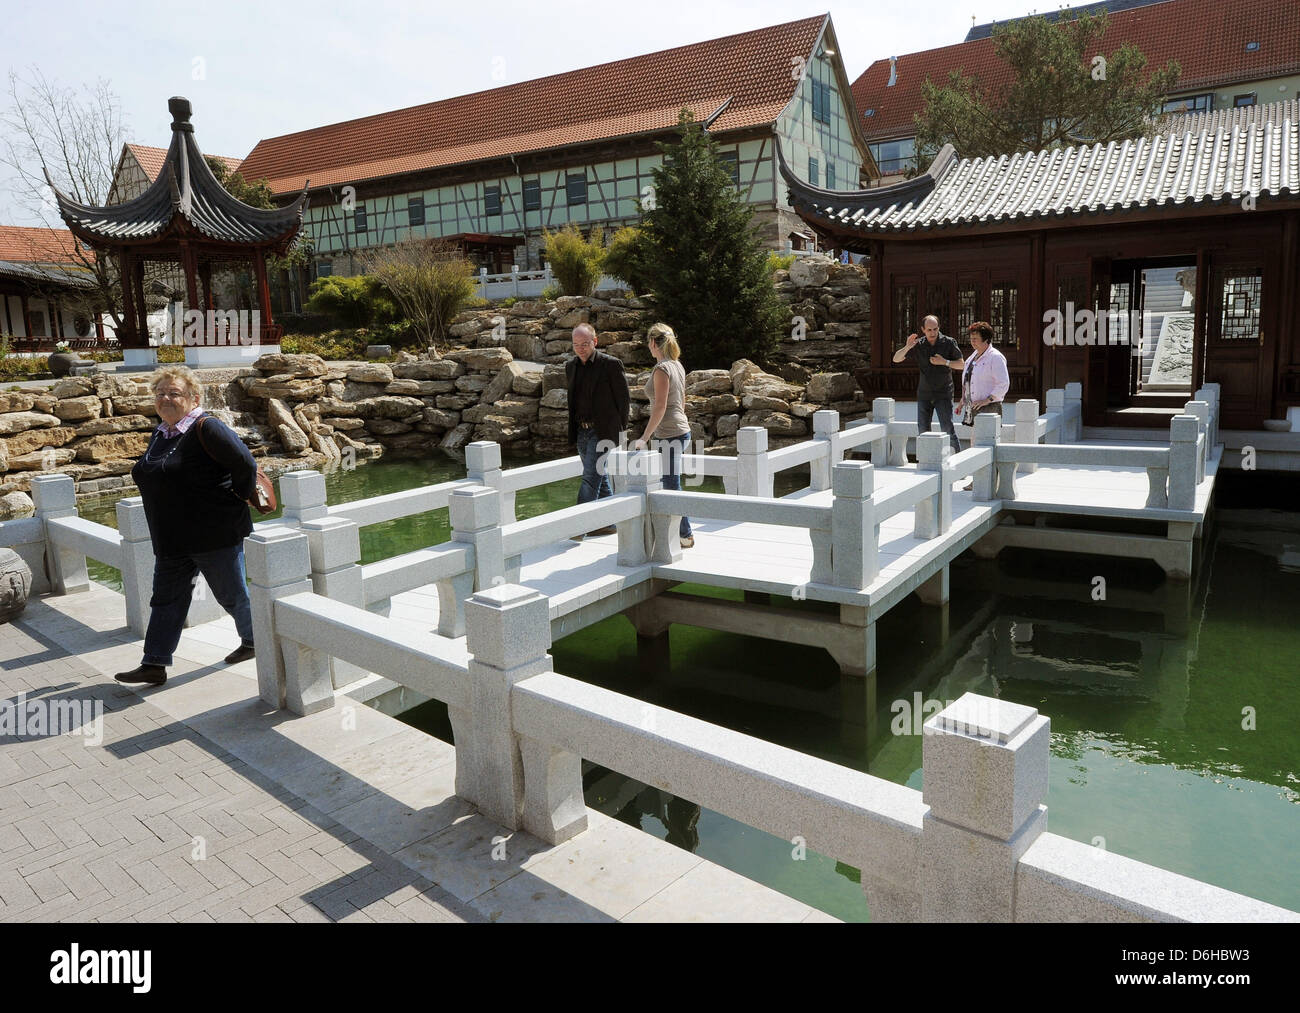 The first visitors walk through the Chinese Garden in Weissensee, Germany, 18 April 2013. The garden, one of the largest Chinese gardens in Germany with 5,000 square meters, opened in 2011 and received 50,000 visitors last year. Photo: BERND SETTNIK Stock Photo